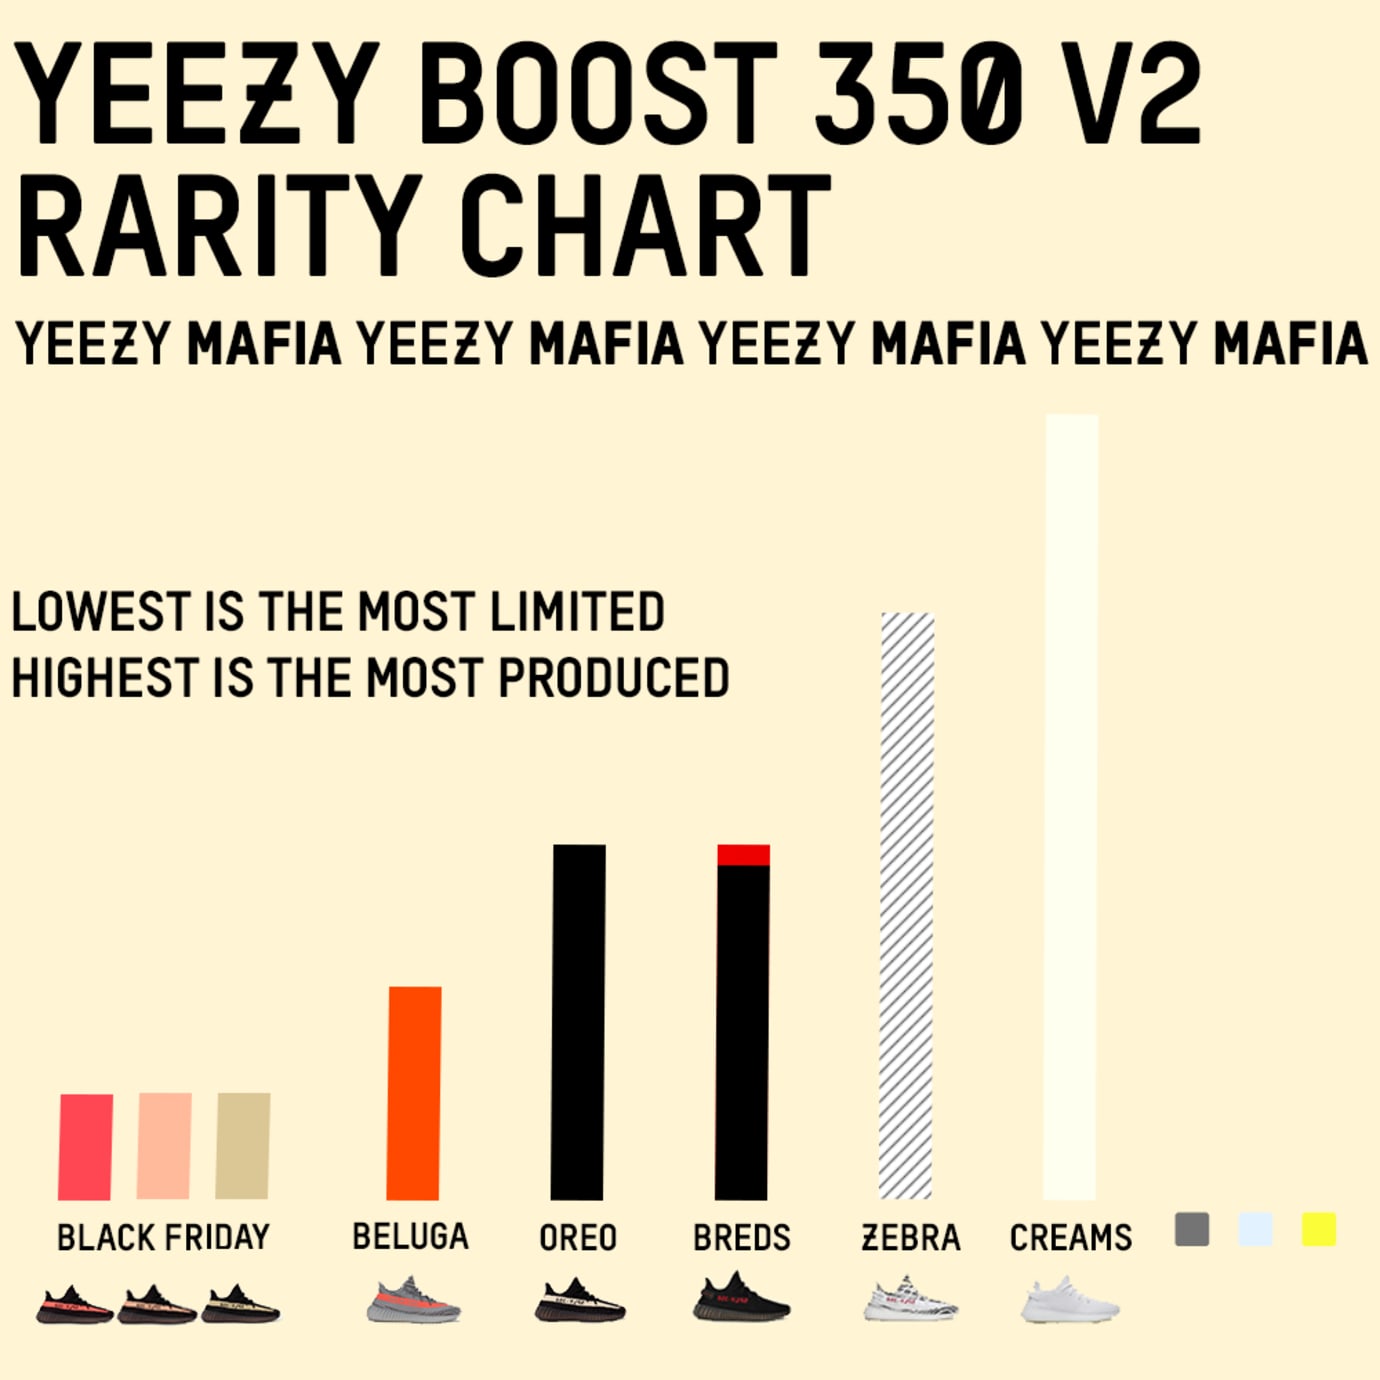 yeezy 350 v2 production numbers